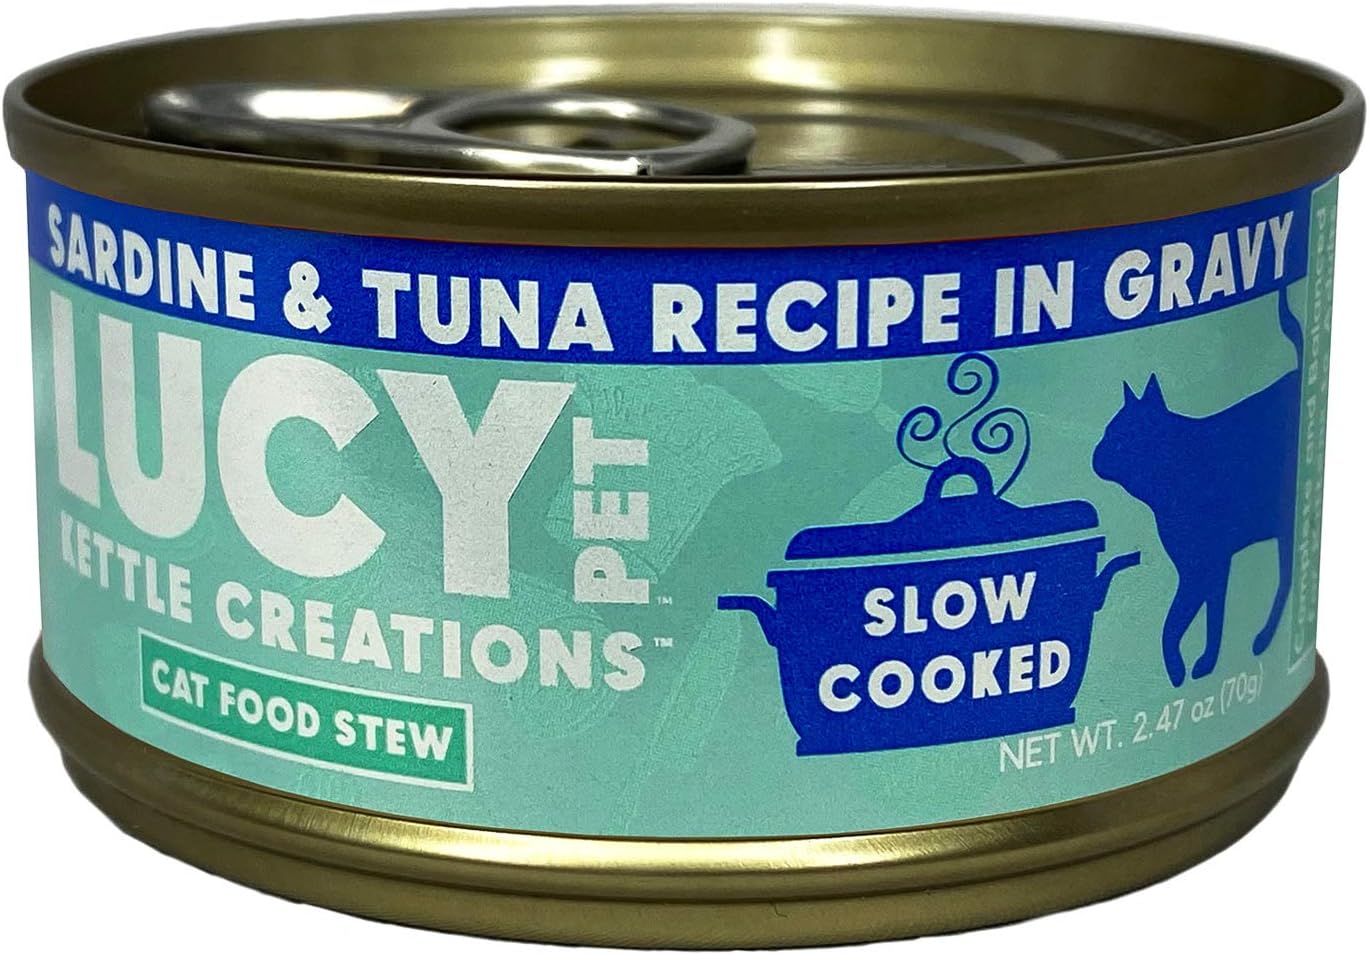 Lucy Pet Products kettle Creations Sardine & Tuna Recipe in Gravy Wet Cat Food